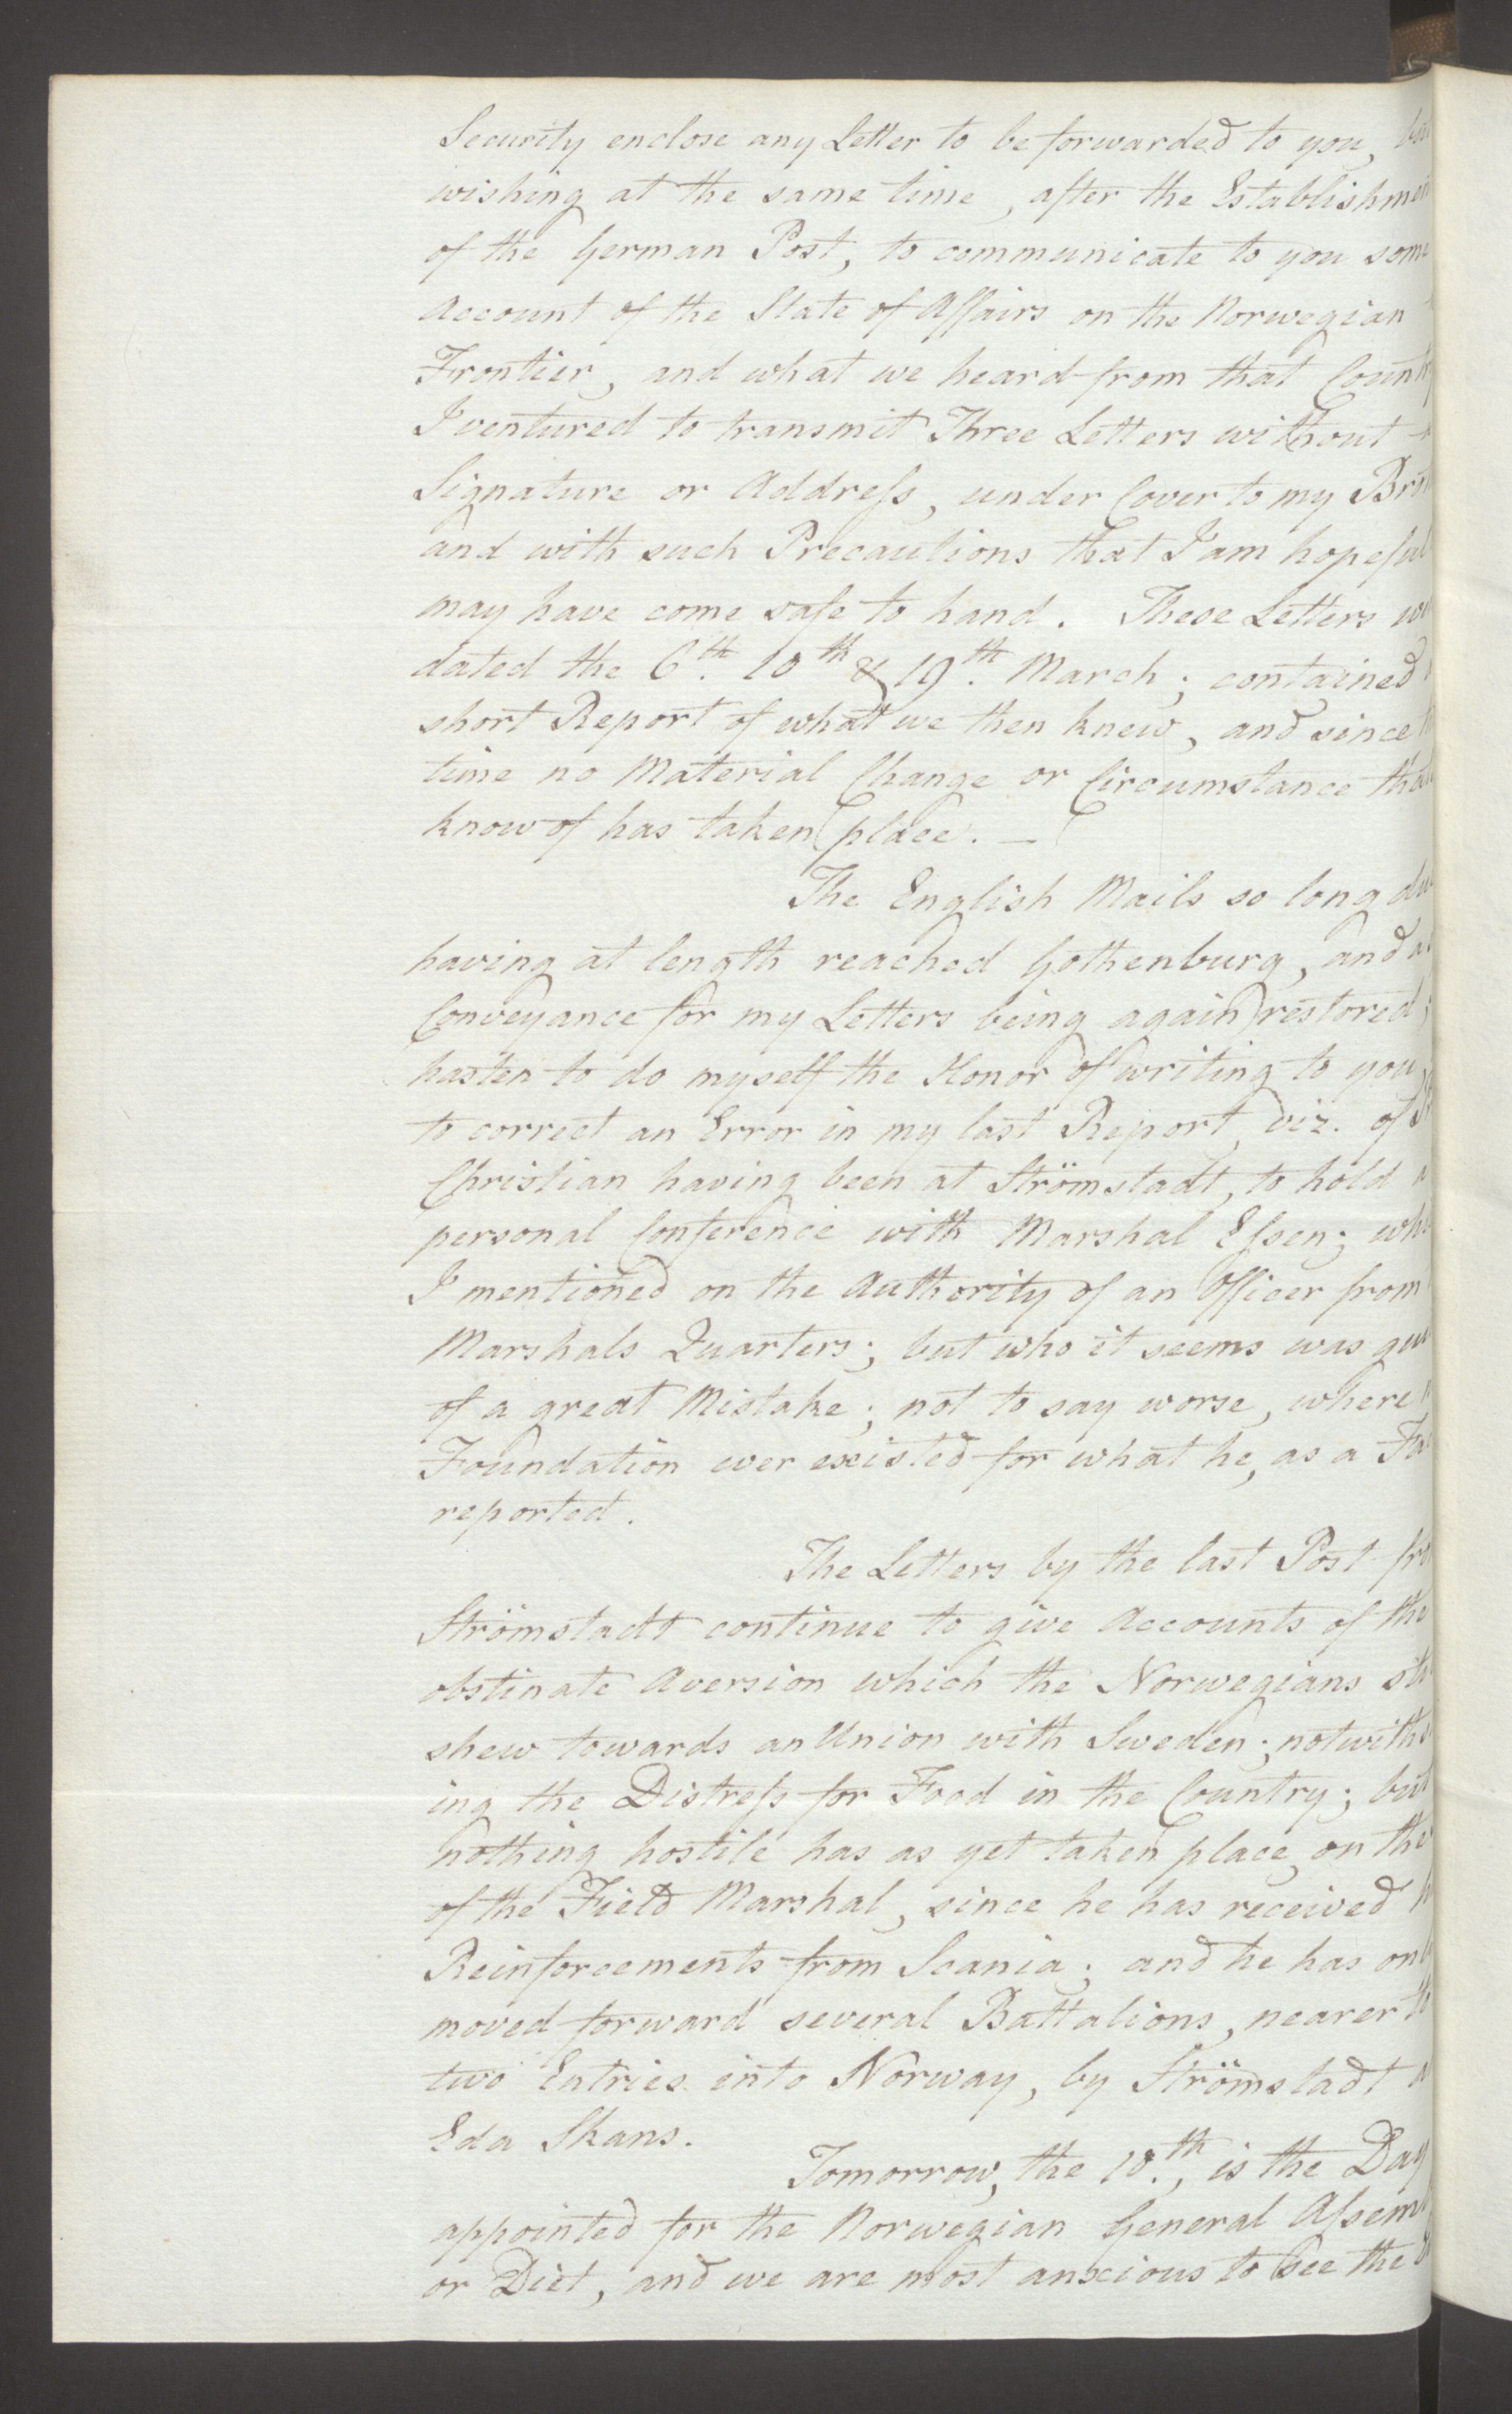 Foreign Office*, UKA/-/FO 38/16: Sir C. Gordon. Reports from Malmö, Jonkoping, and Helsingborg, 1814, s. 31